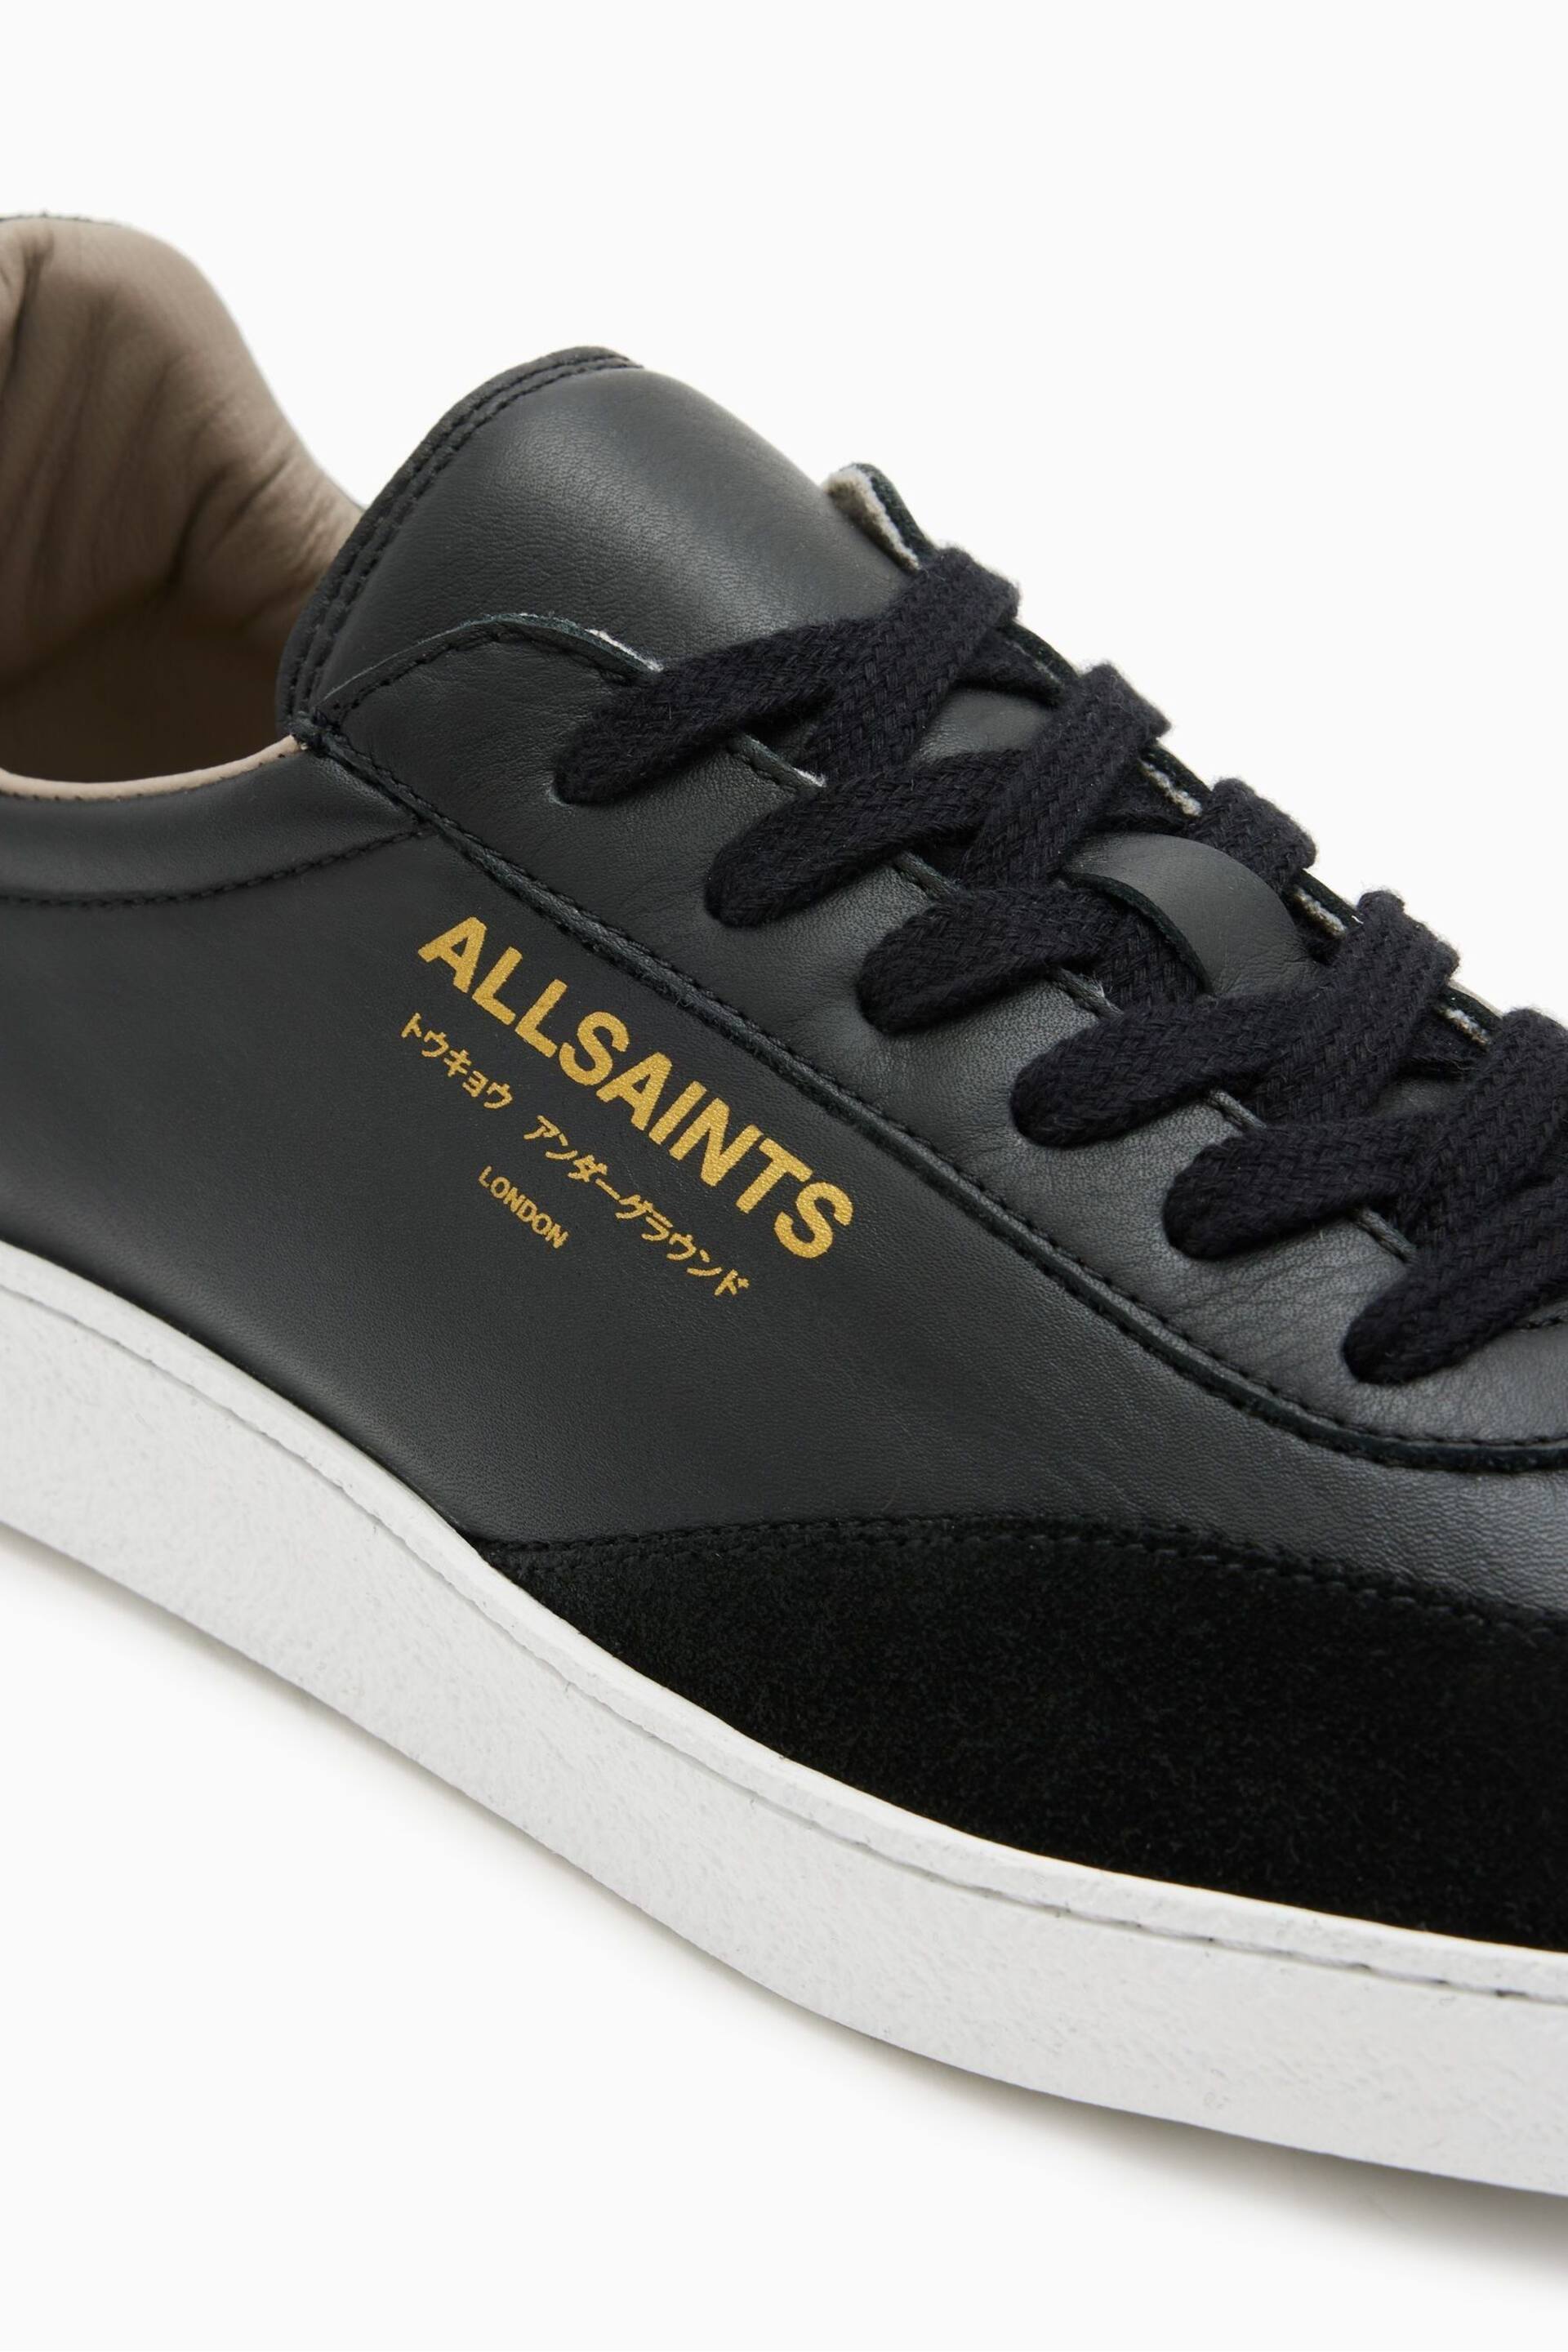 AllSaints Black Thelma Sneakers - Image 5 of 5